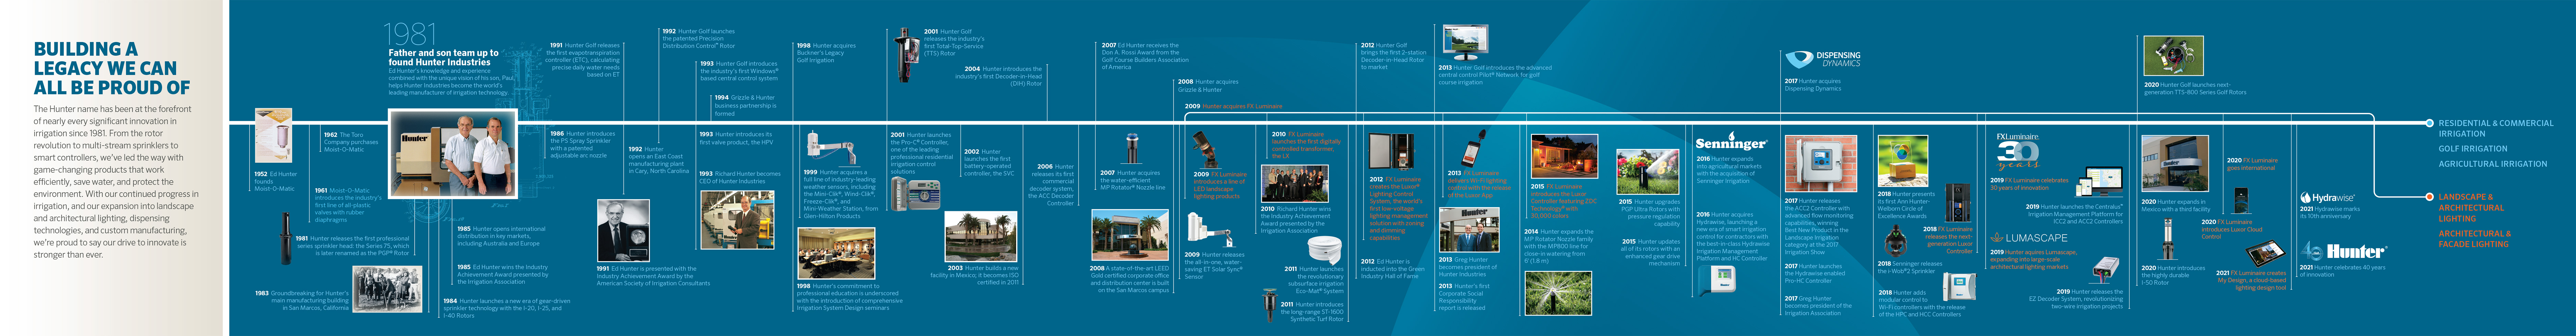 Hunter Industries timeline graphic